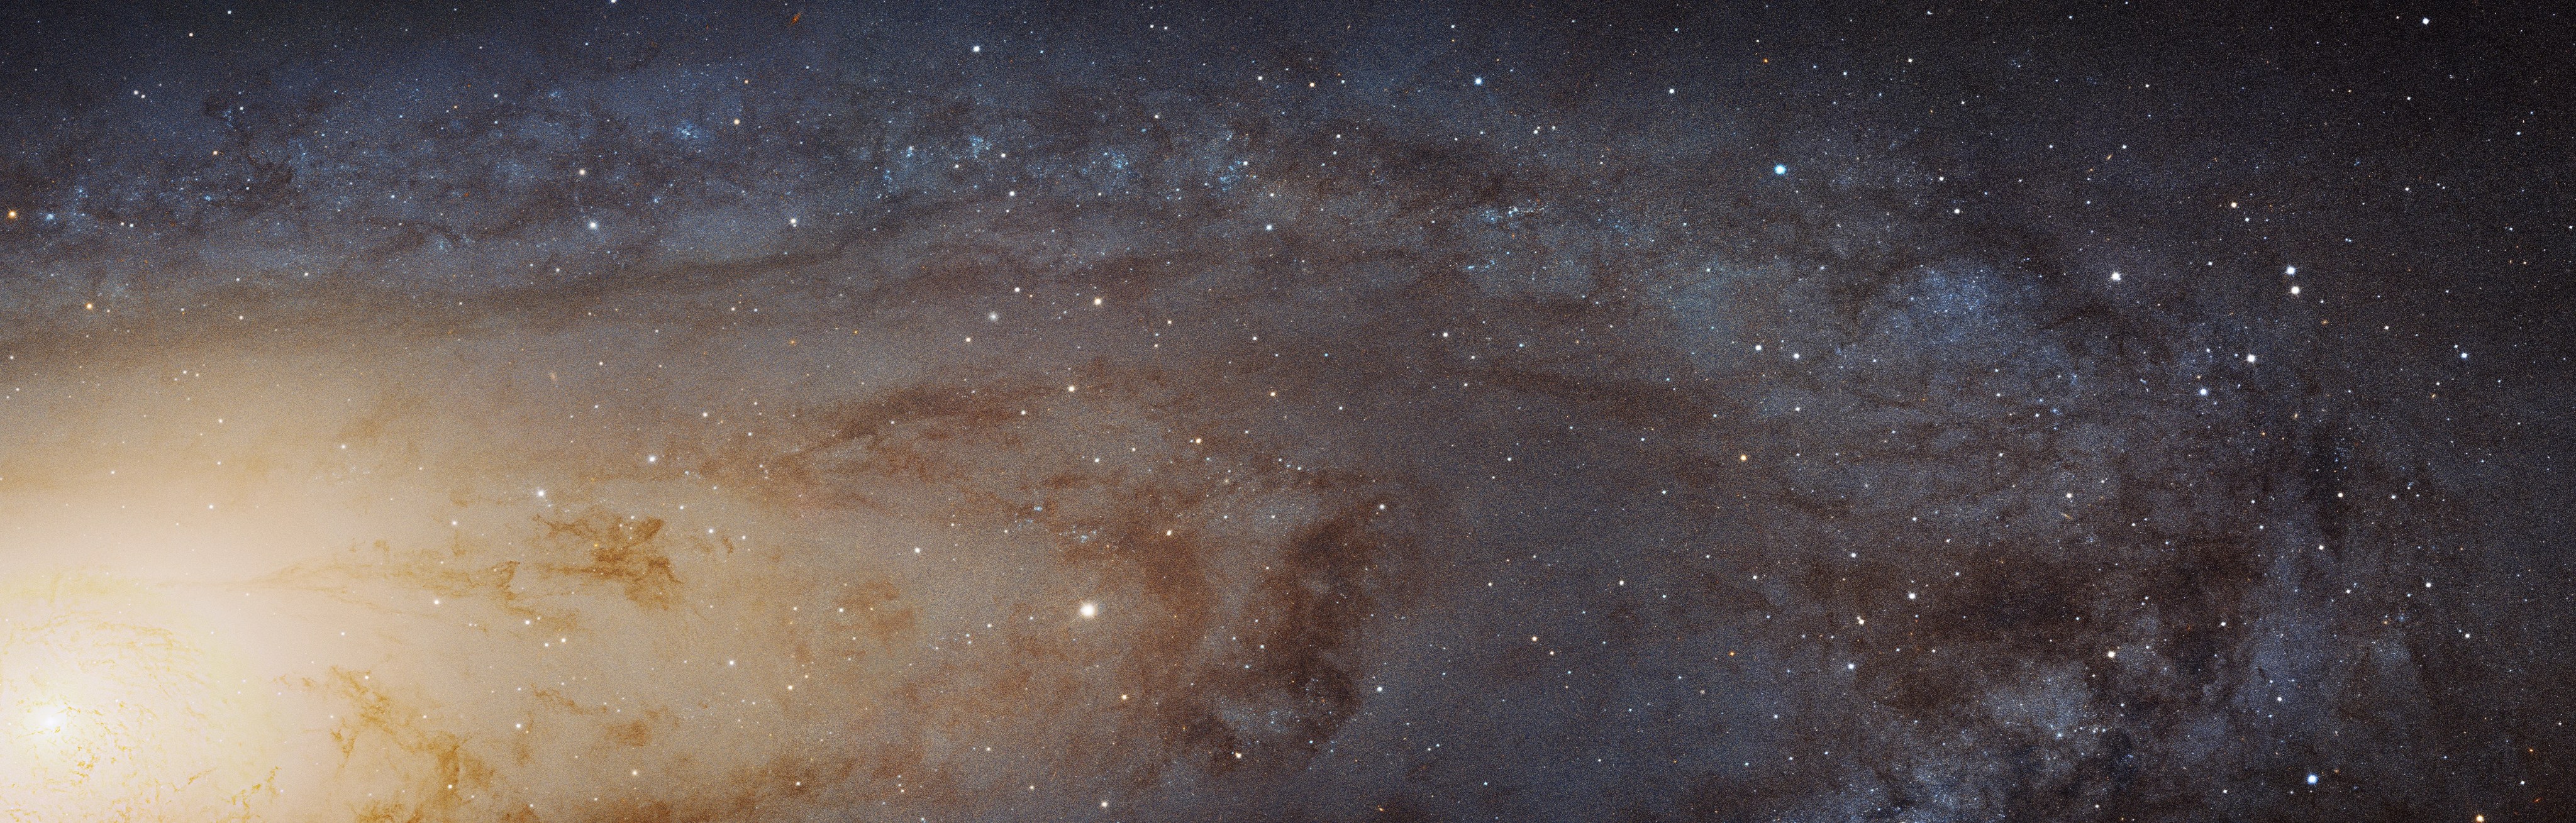 This sweeping bird's-eye view of a portion of the Andromeda galaxy (M31) is the sharpest image ever taken of the galaxy.